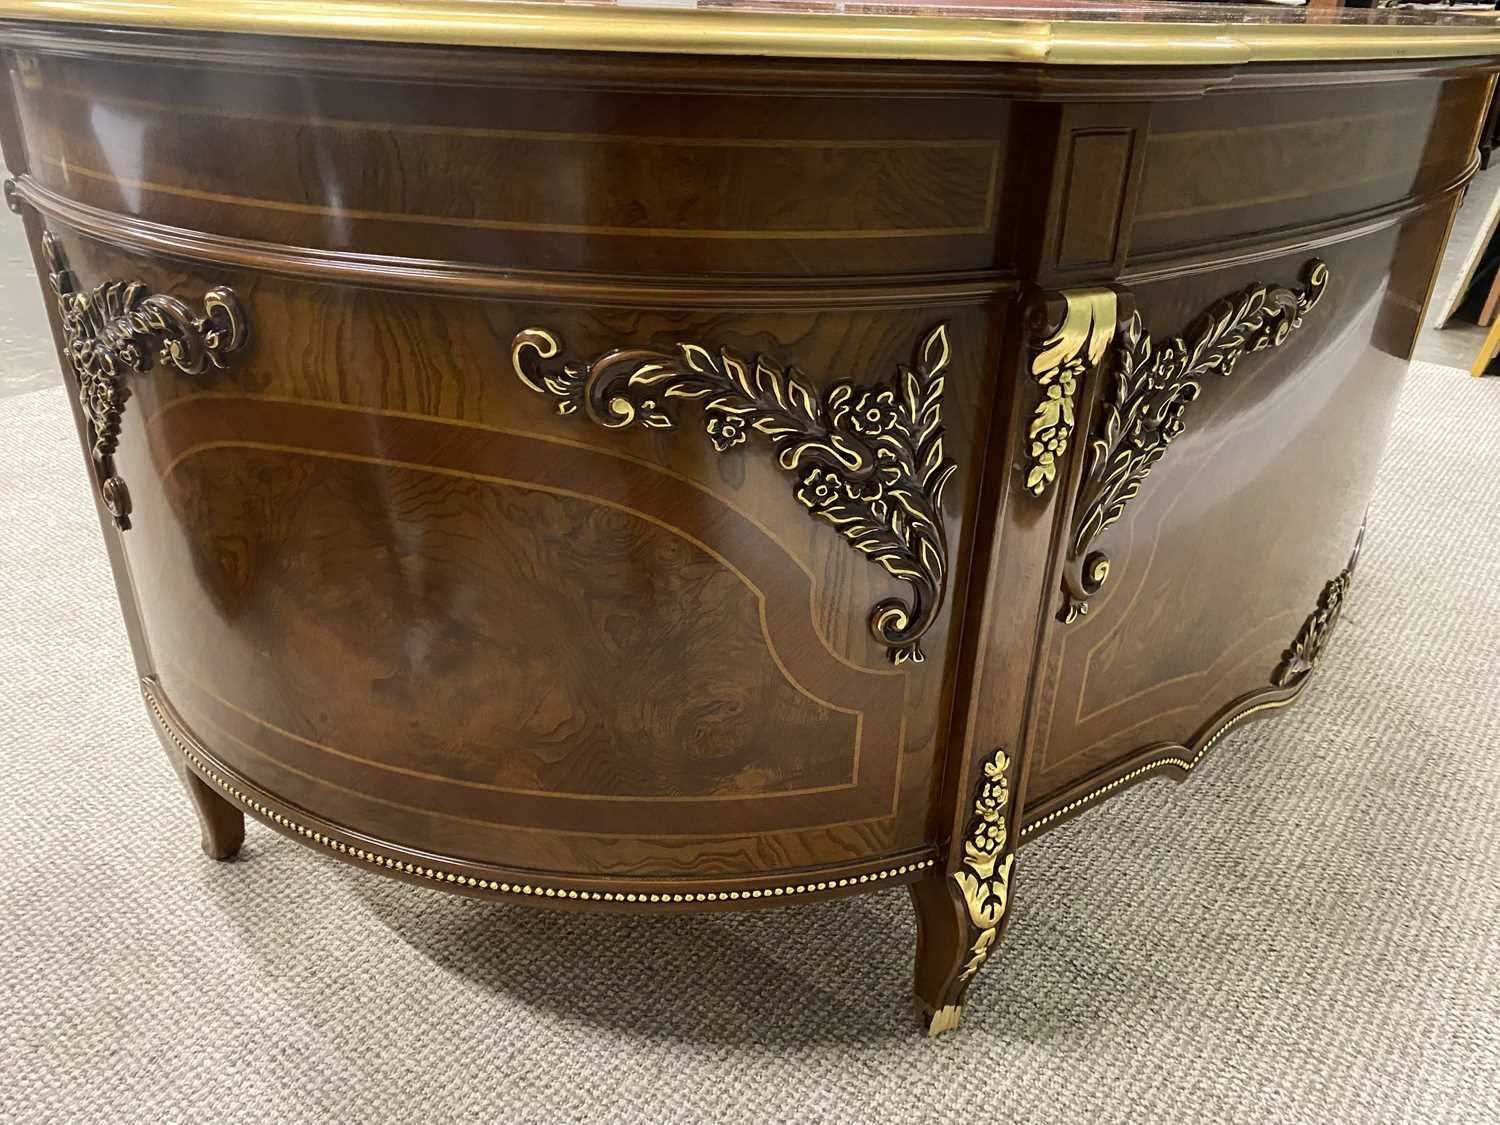 BARNINI OSEO EMPIRE-STYLE DEMI LUNE REGGENZA DESK, the shaped gilt edged top with various inlays - Image 7 of 7